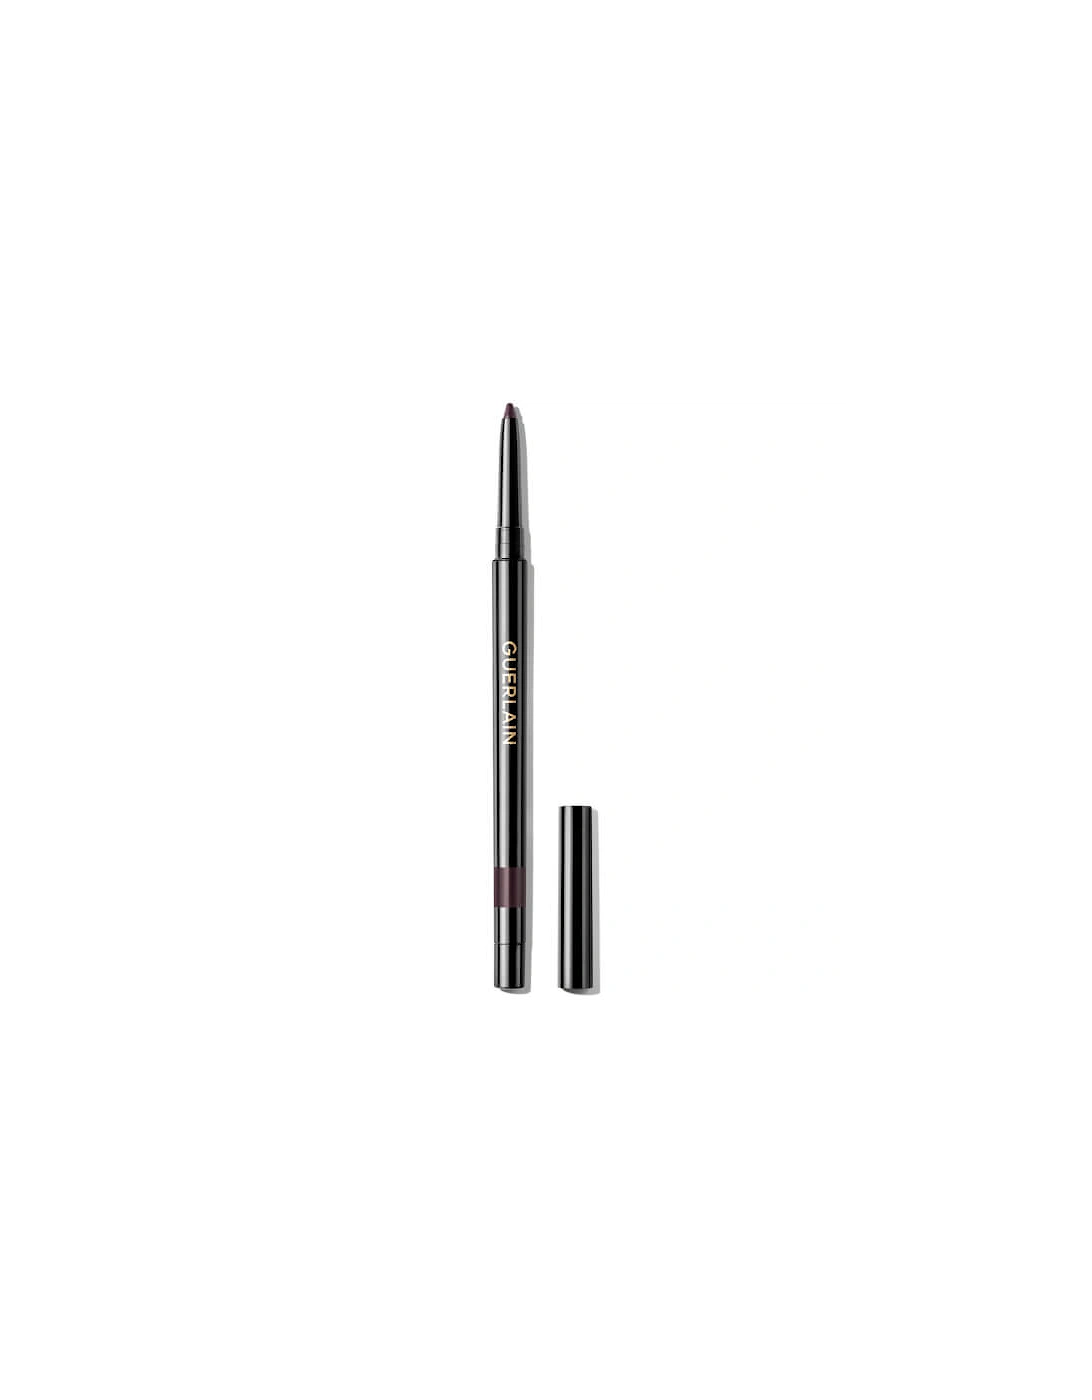 The Eye Pencil Intense Colour Long-Lasting and Waterproof - 04 Plum Peony, 2 of 1